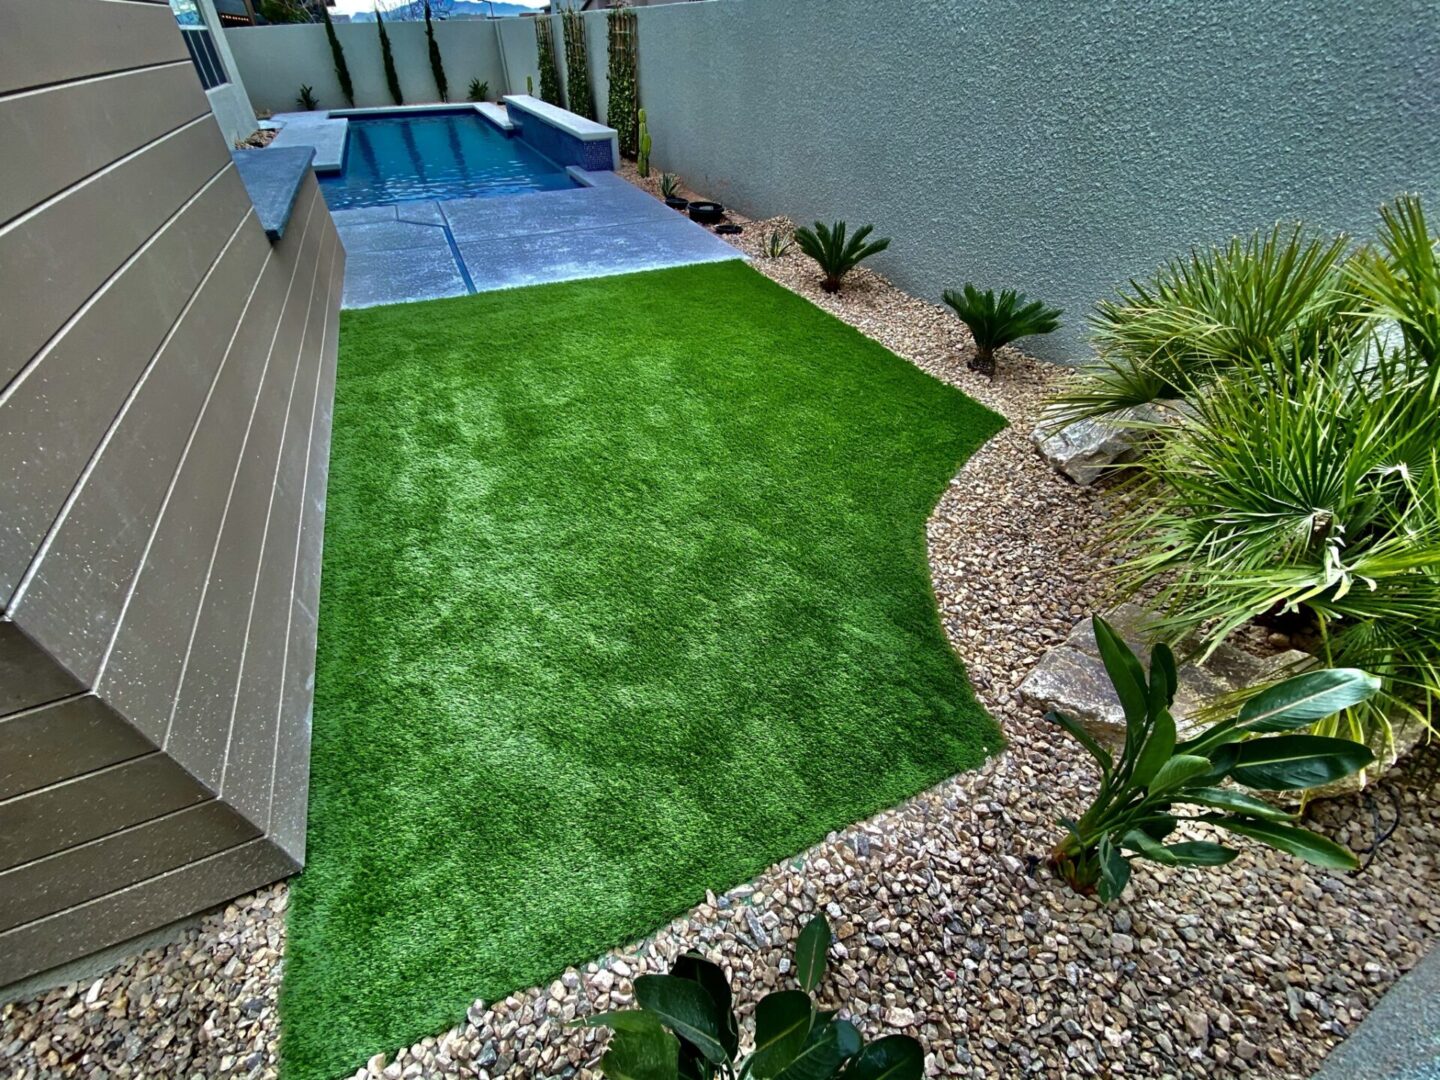 A backyard with a pool and grass